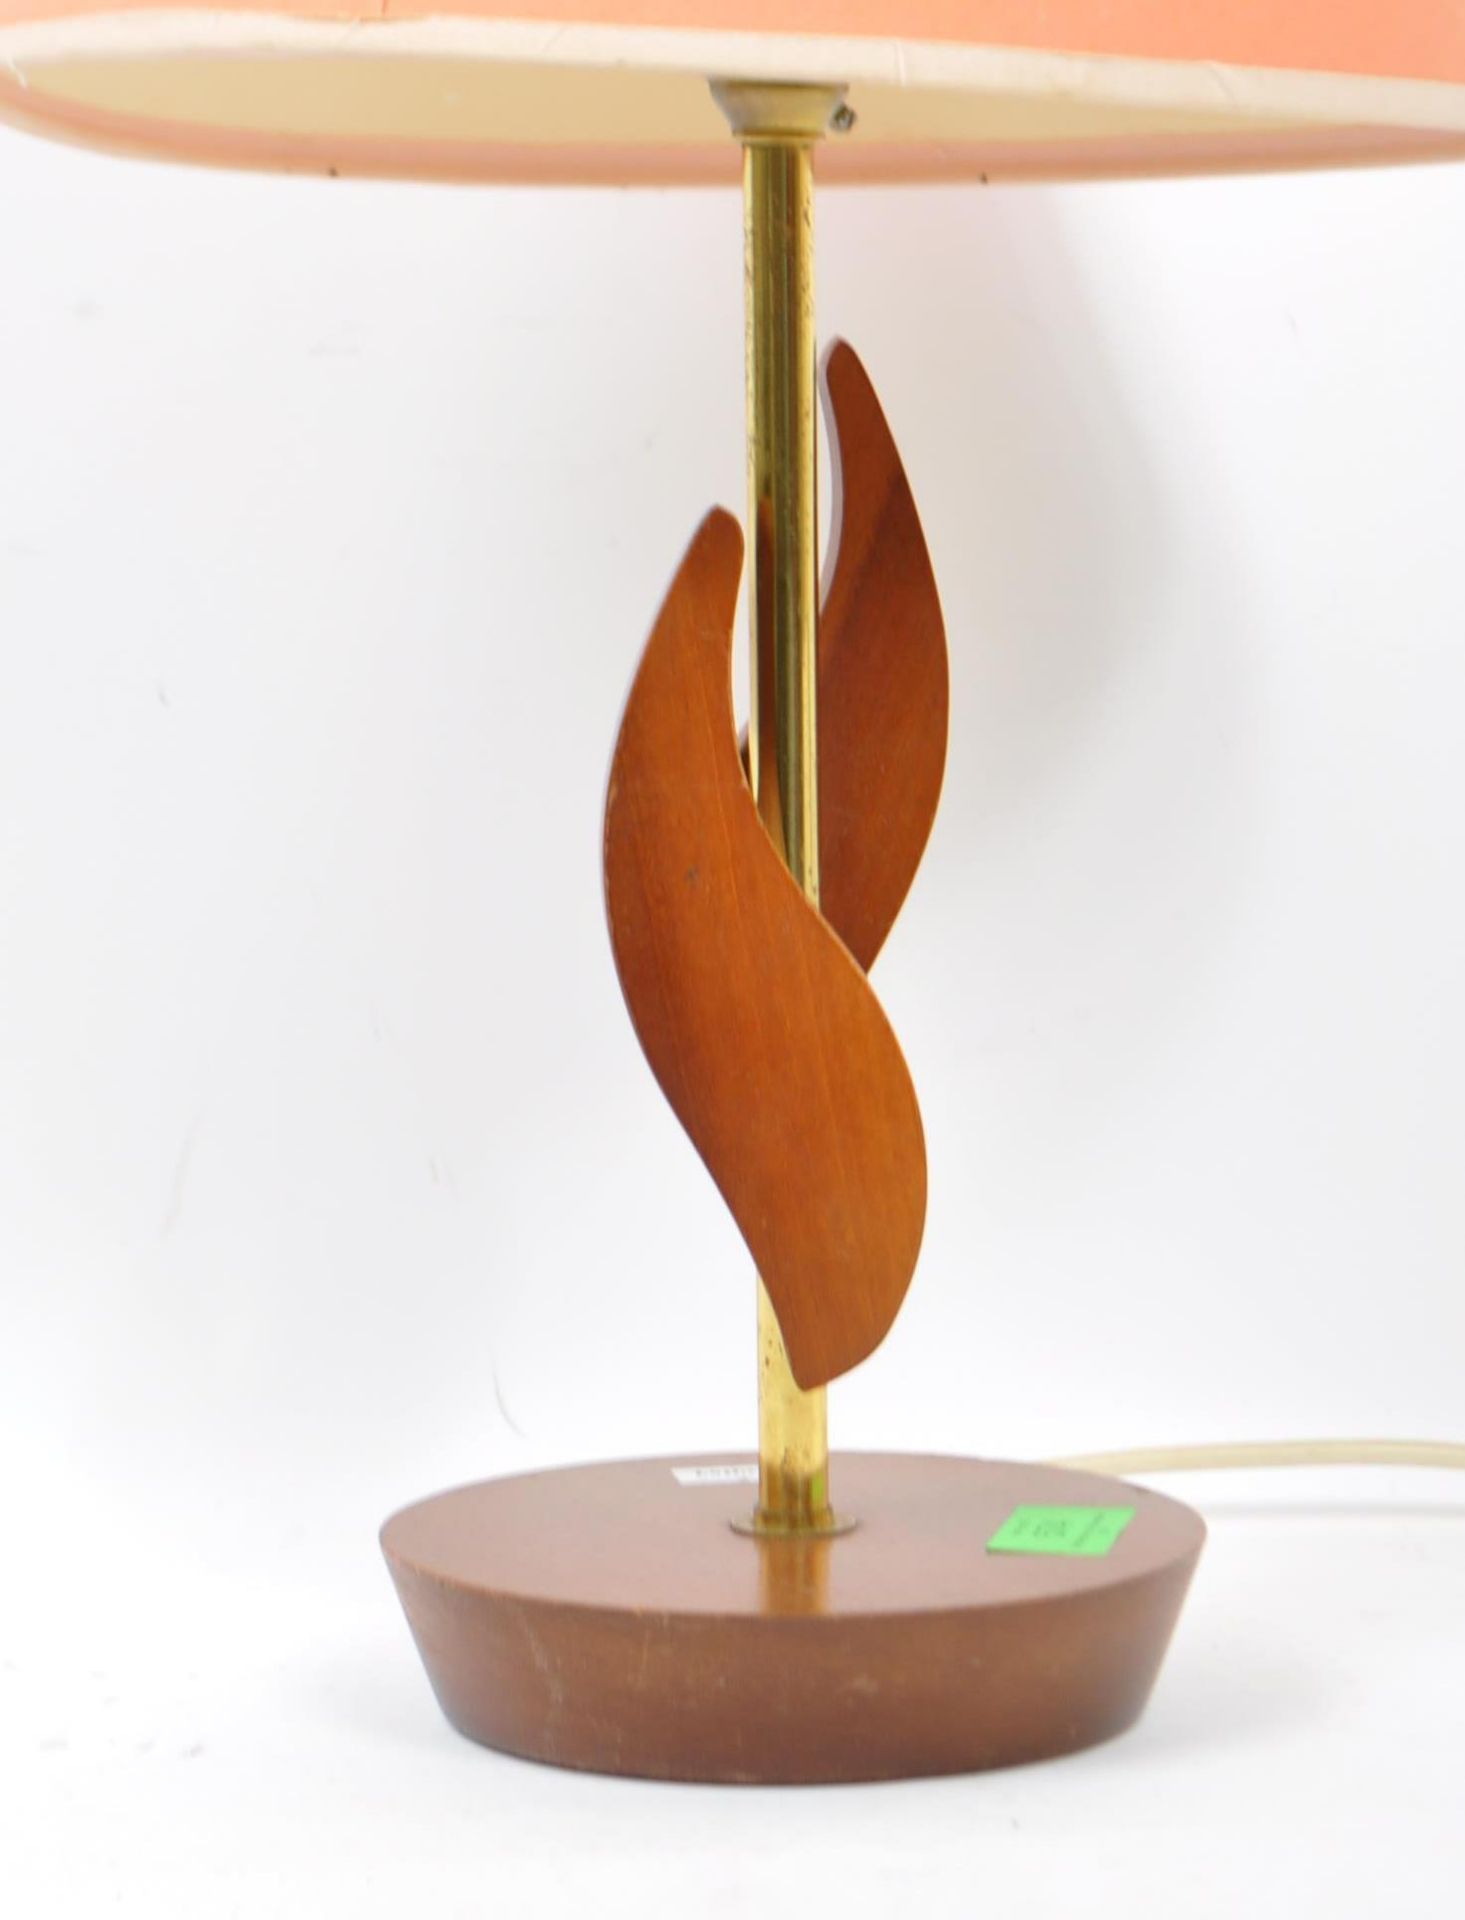 MID CENTURY TEAK AND BRASS TABLE LAMP - Image 2 of 4